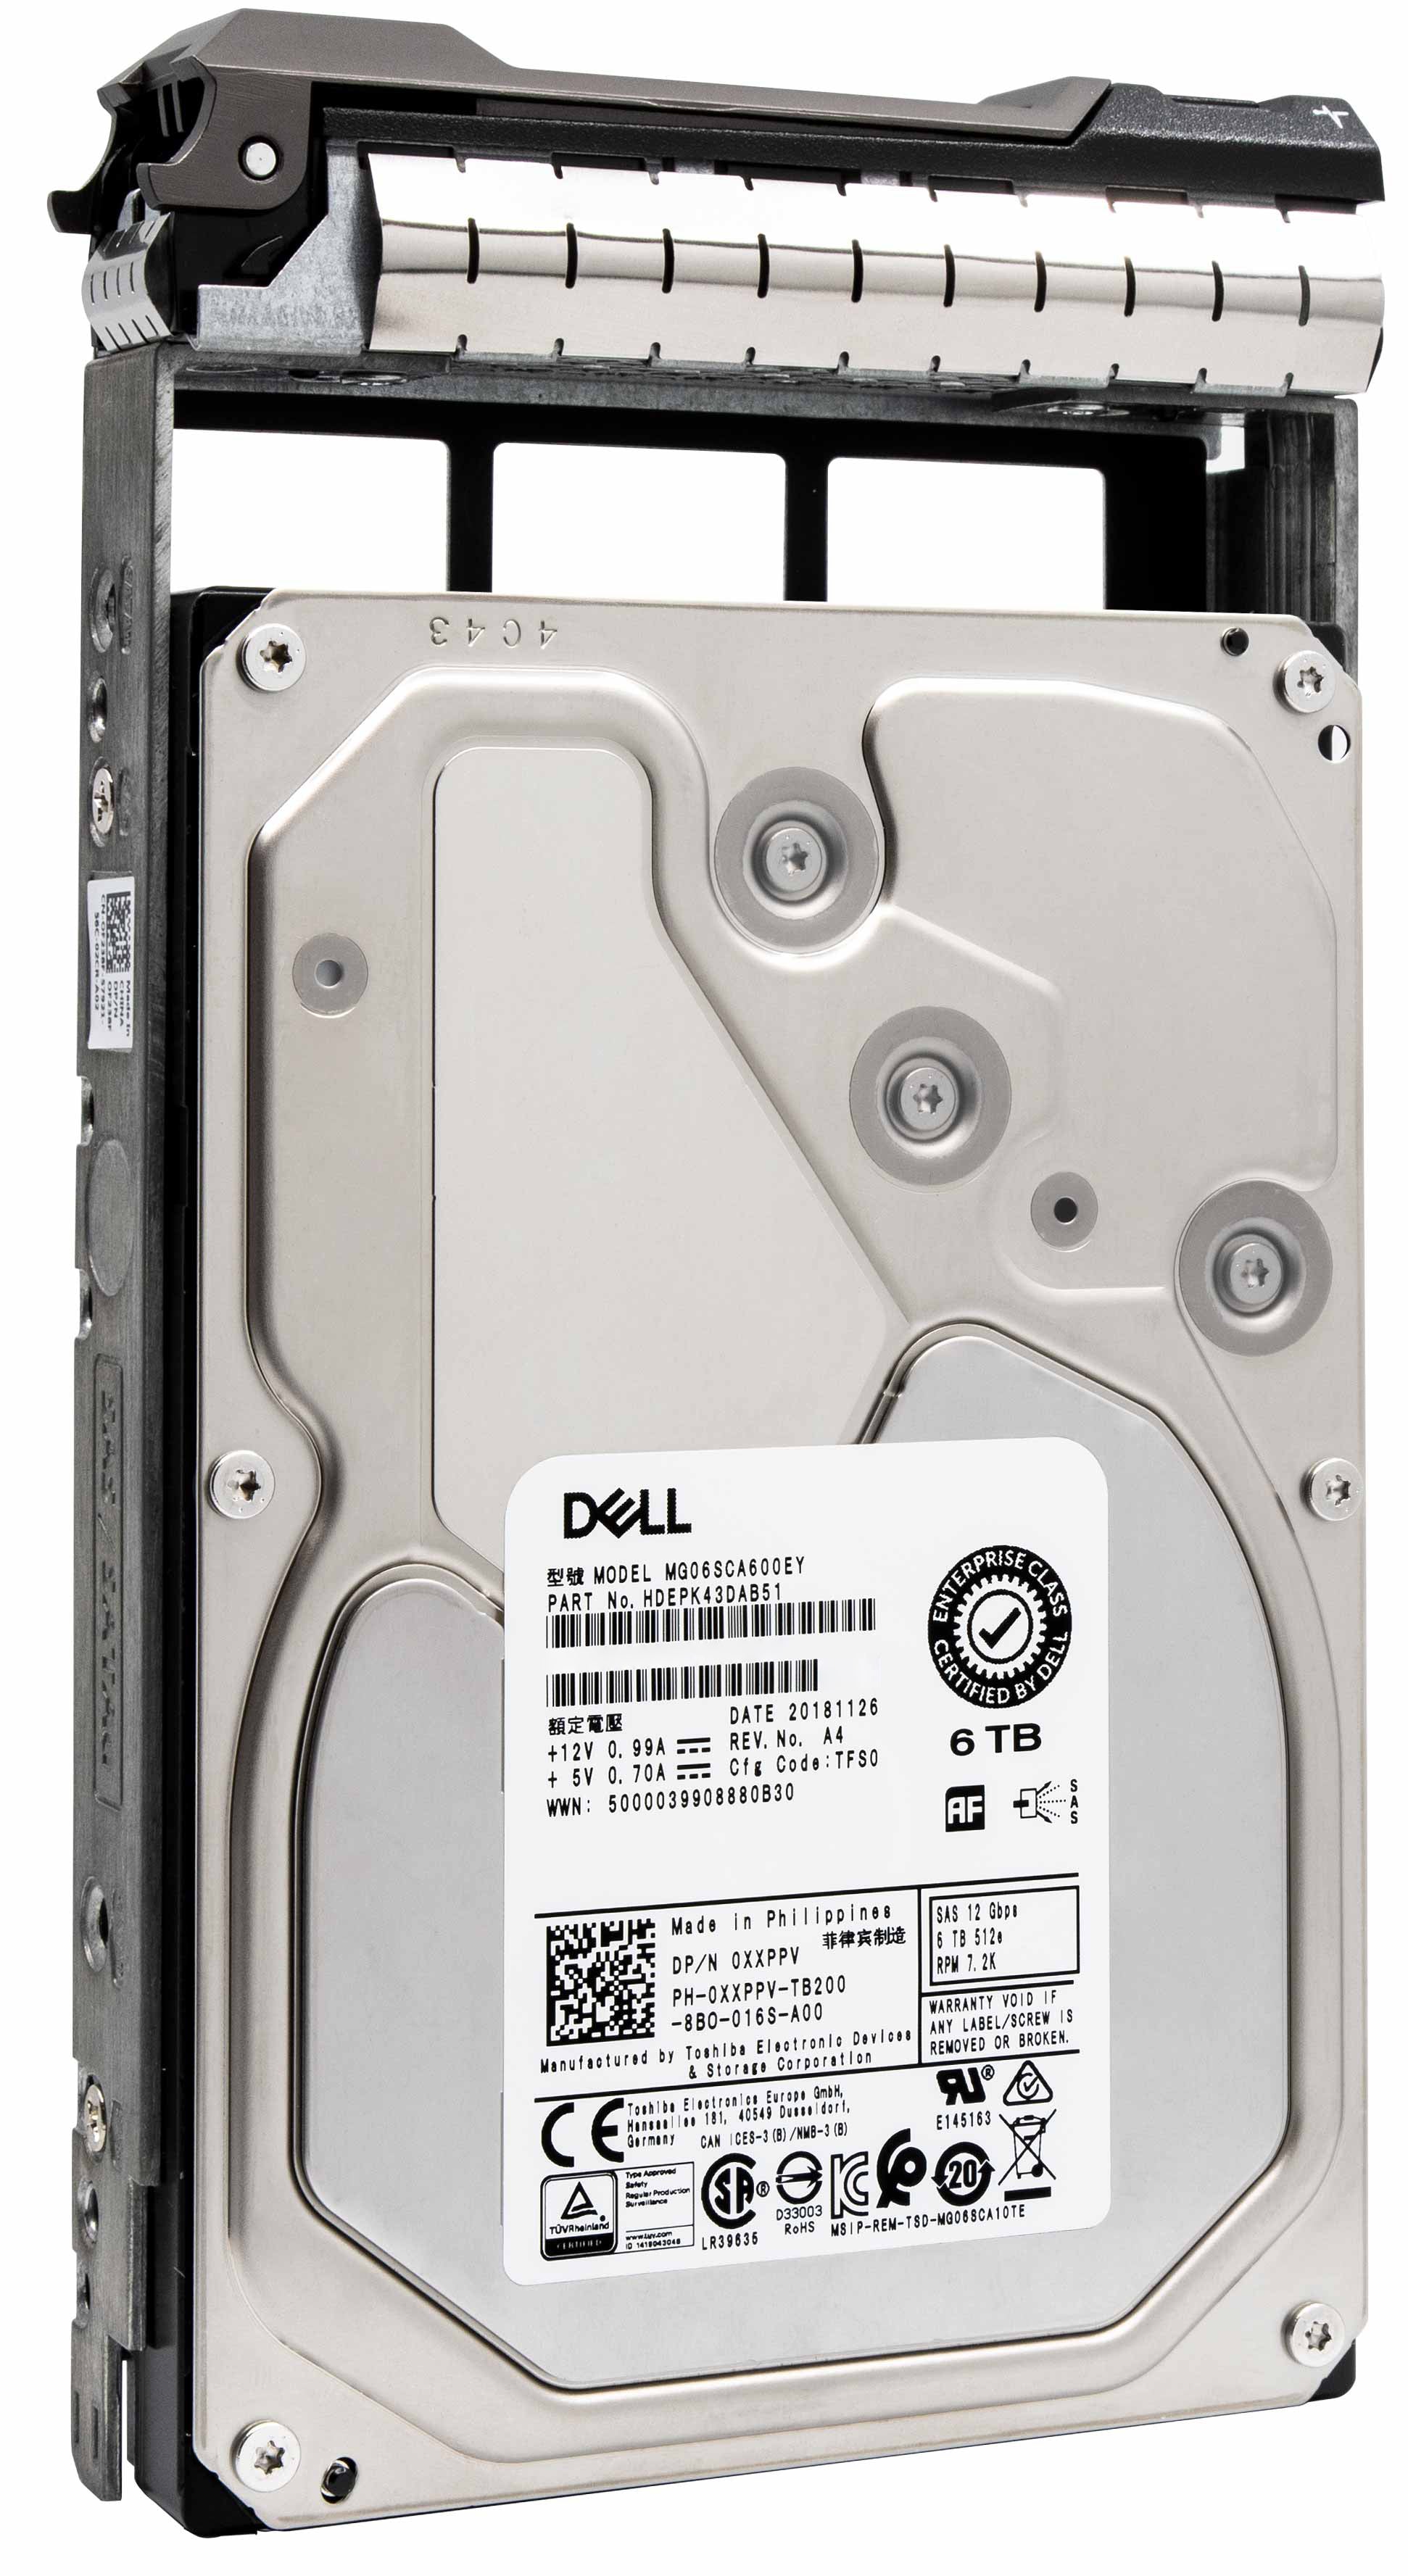 Dell G13 400-ALCR 6TB 7.2K RPM SAS 12Gb/s 512e 3.5" NearLine Manufacturer Recertified HDD